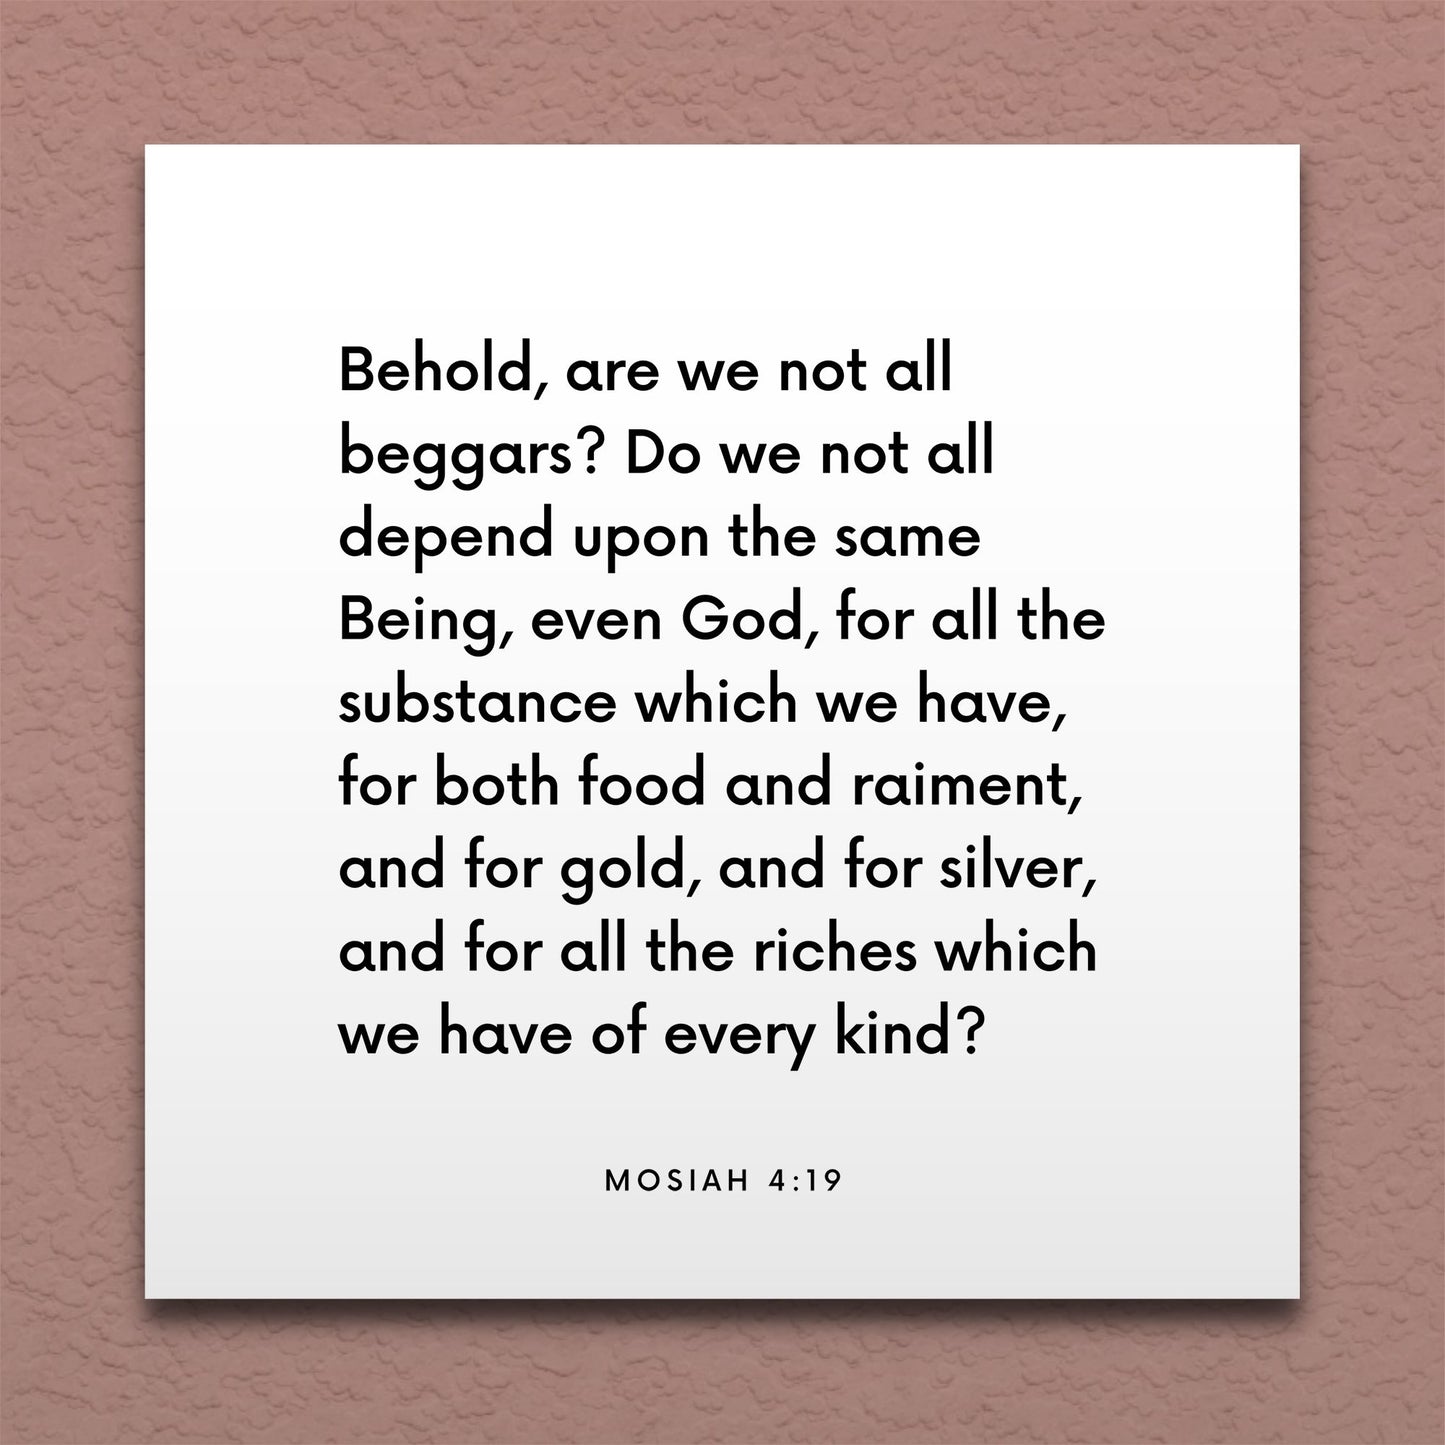 Wall-mounted scripture tile for Mosiah 4:19 - "Behold, are we not all beggars?"